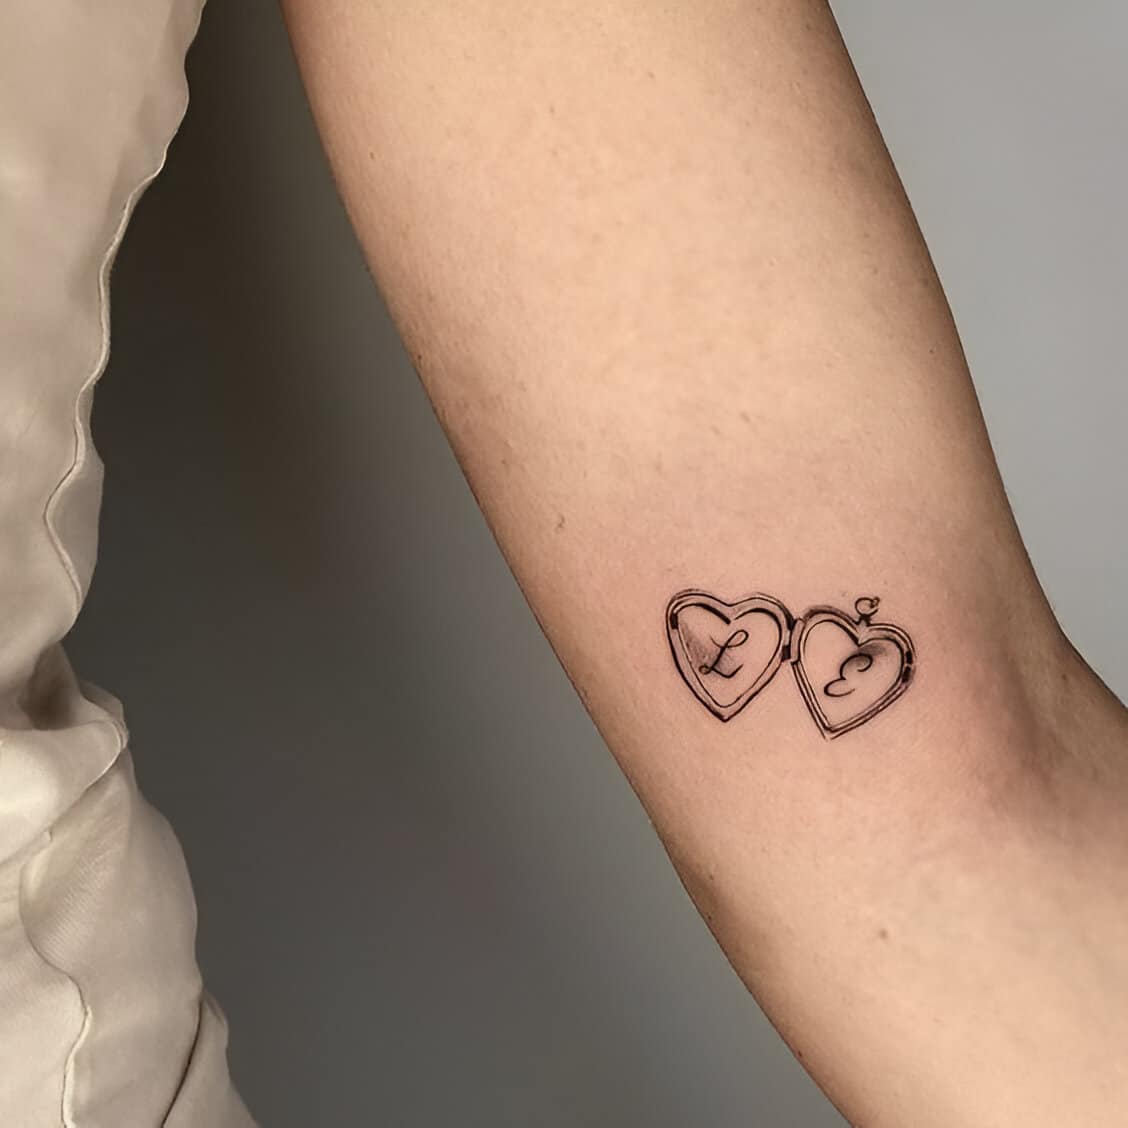 30 Elegant Matching Heart Tattoos To Get With Your Partner ASAP 10